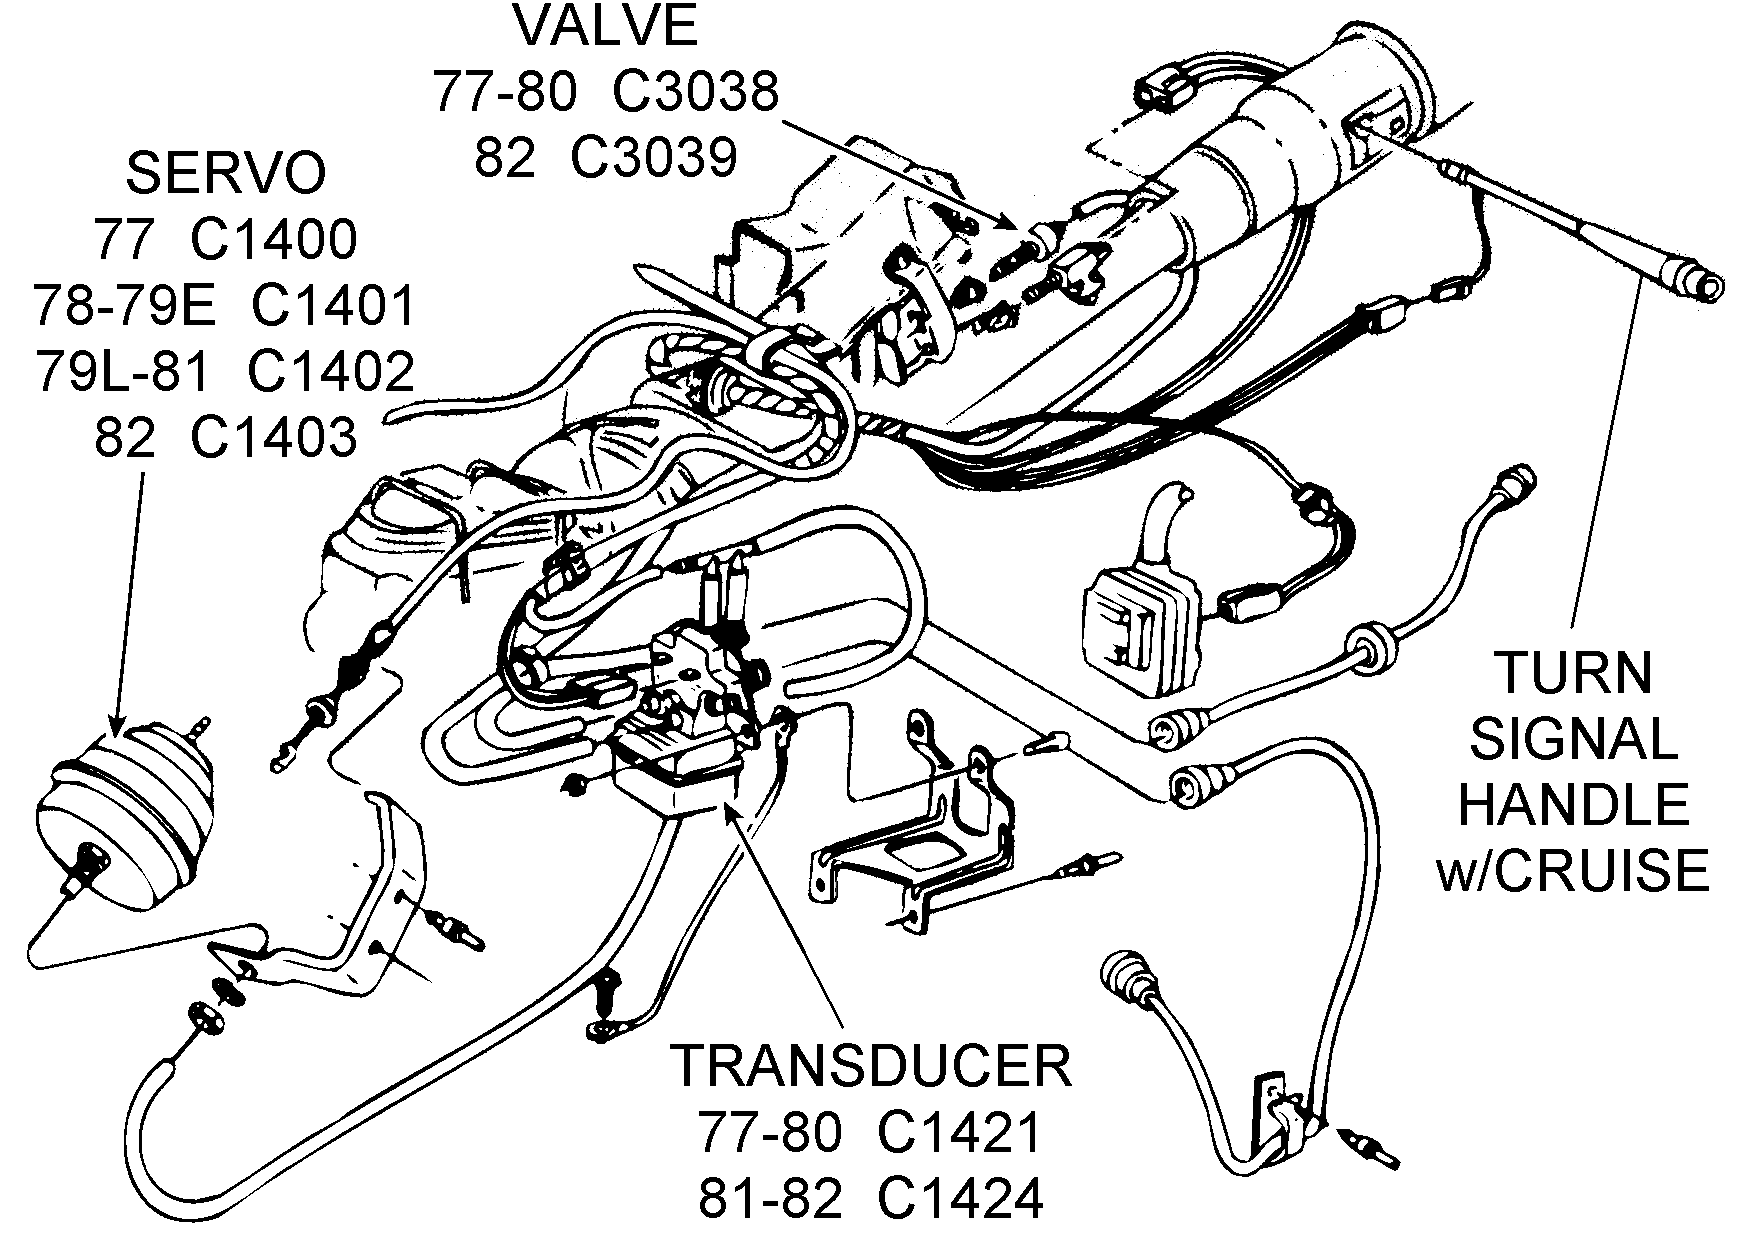 Cruise control Vac Drawing for 1982 with Resume ... 1970 cj5 dash wiring diagram schematic 